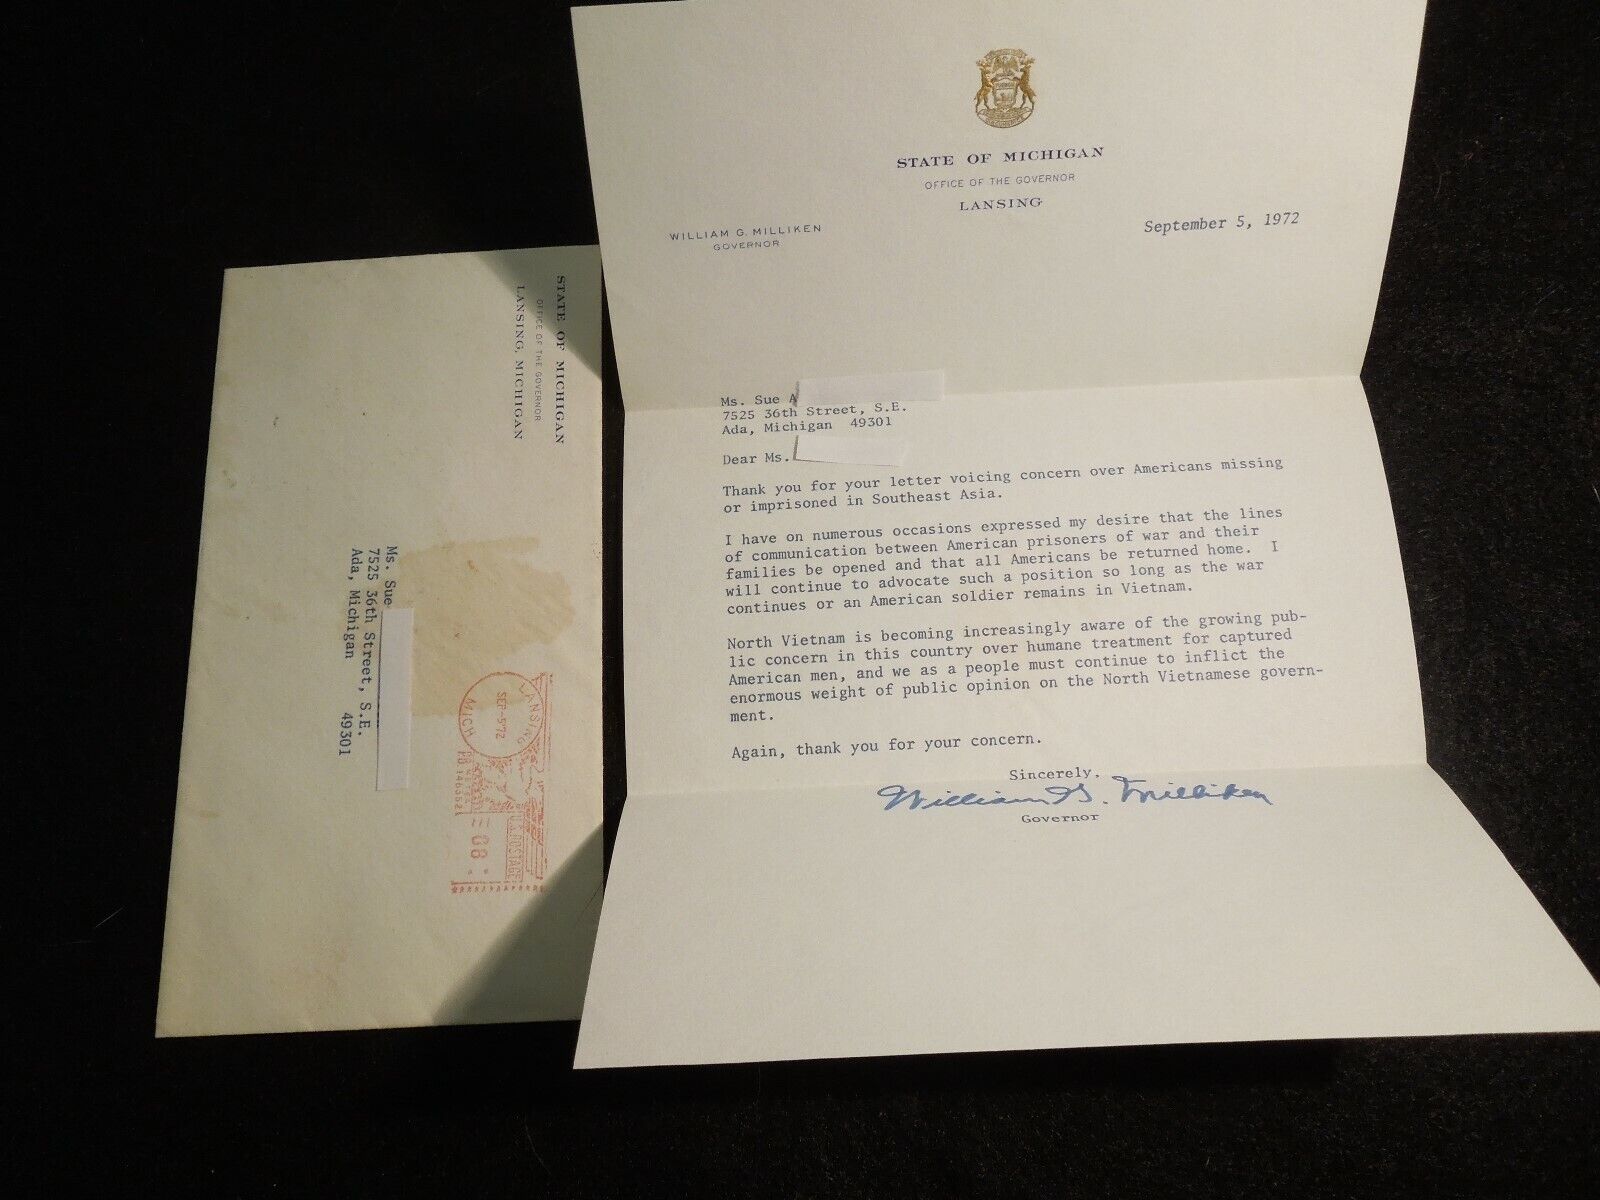 William G. Milliken Authentic Signed Office Letter Governer of Michigan 9/5/72